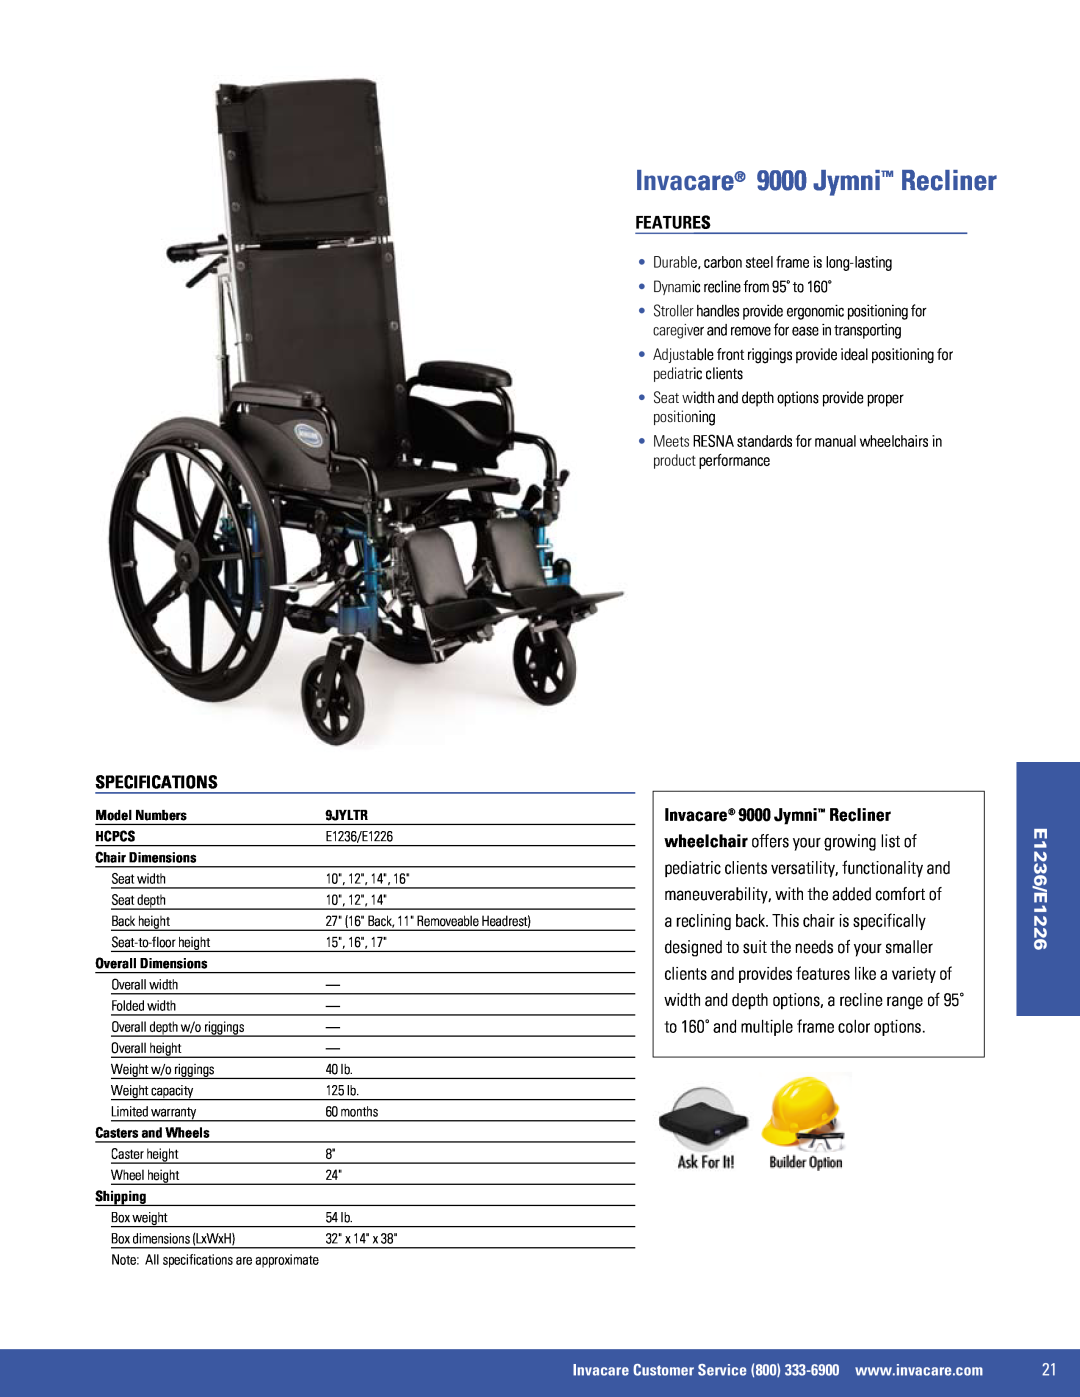 Invacare 9000 SL Invacare 9000 Jymni Recliner, Specifications, Features, E1236/E1226, Dynamic recline from 95˚ to 160˚ 